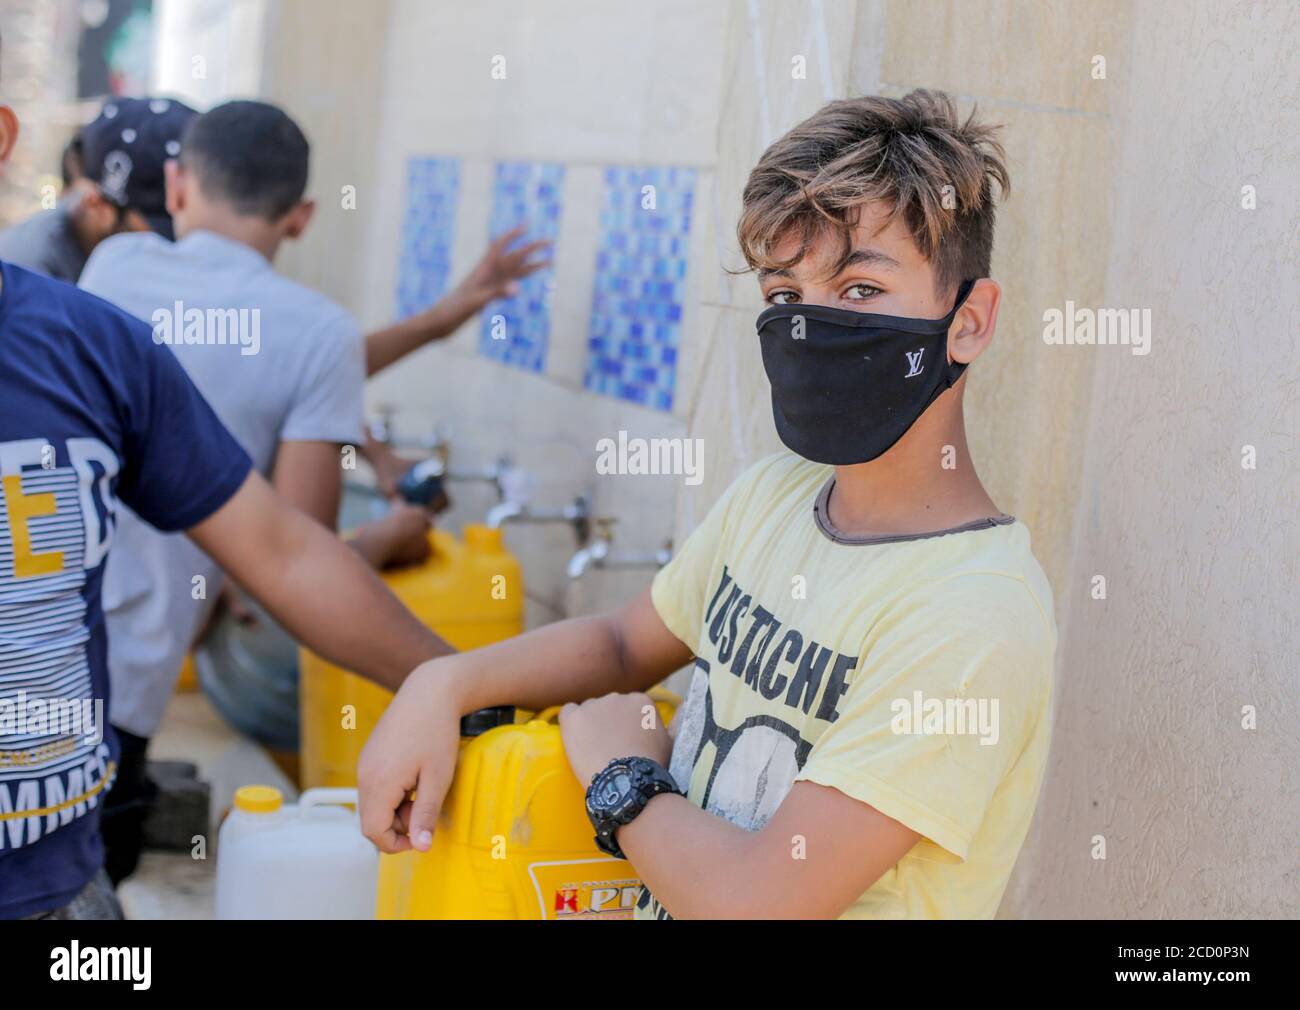 A kid wearing a face mask as a preventive measure waits to fill bottles with drinking water from a desalination plant during the Coronavirus (COVID-19) lockdown .Gaza reported its first cases in the general population as authorities confirmed four infections at a refugee camp and security forces declared a full lockdown for 48 hours. The four cases were from a single family, according to a government statement. The closure would affect the entire Gaza Strip, according to an official from Hamas, the group that governs the territory. Stock Photo